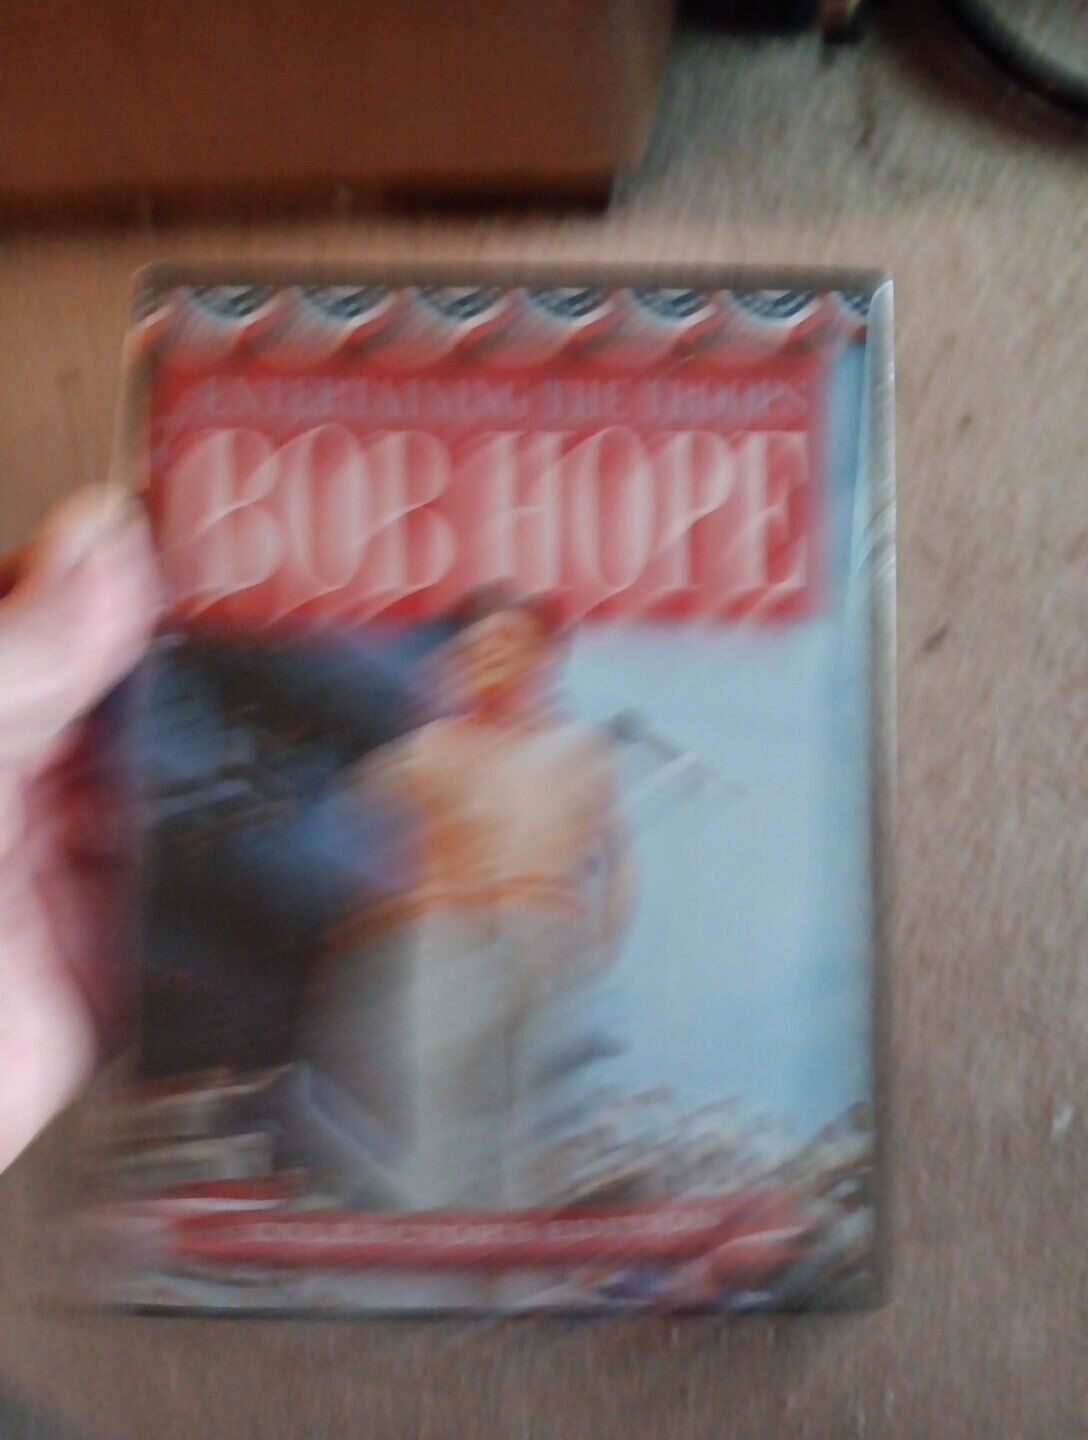 BOB HOPE ENTERTAINING THE TROOPS (DVD SET) LUCILLE BALL, JAYNE MANSFIELD,